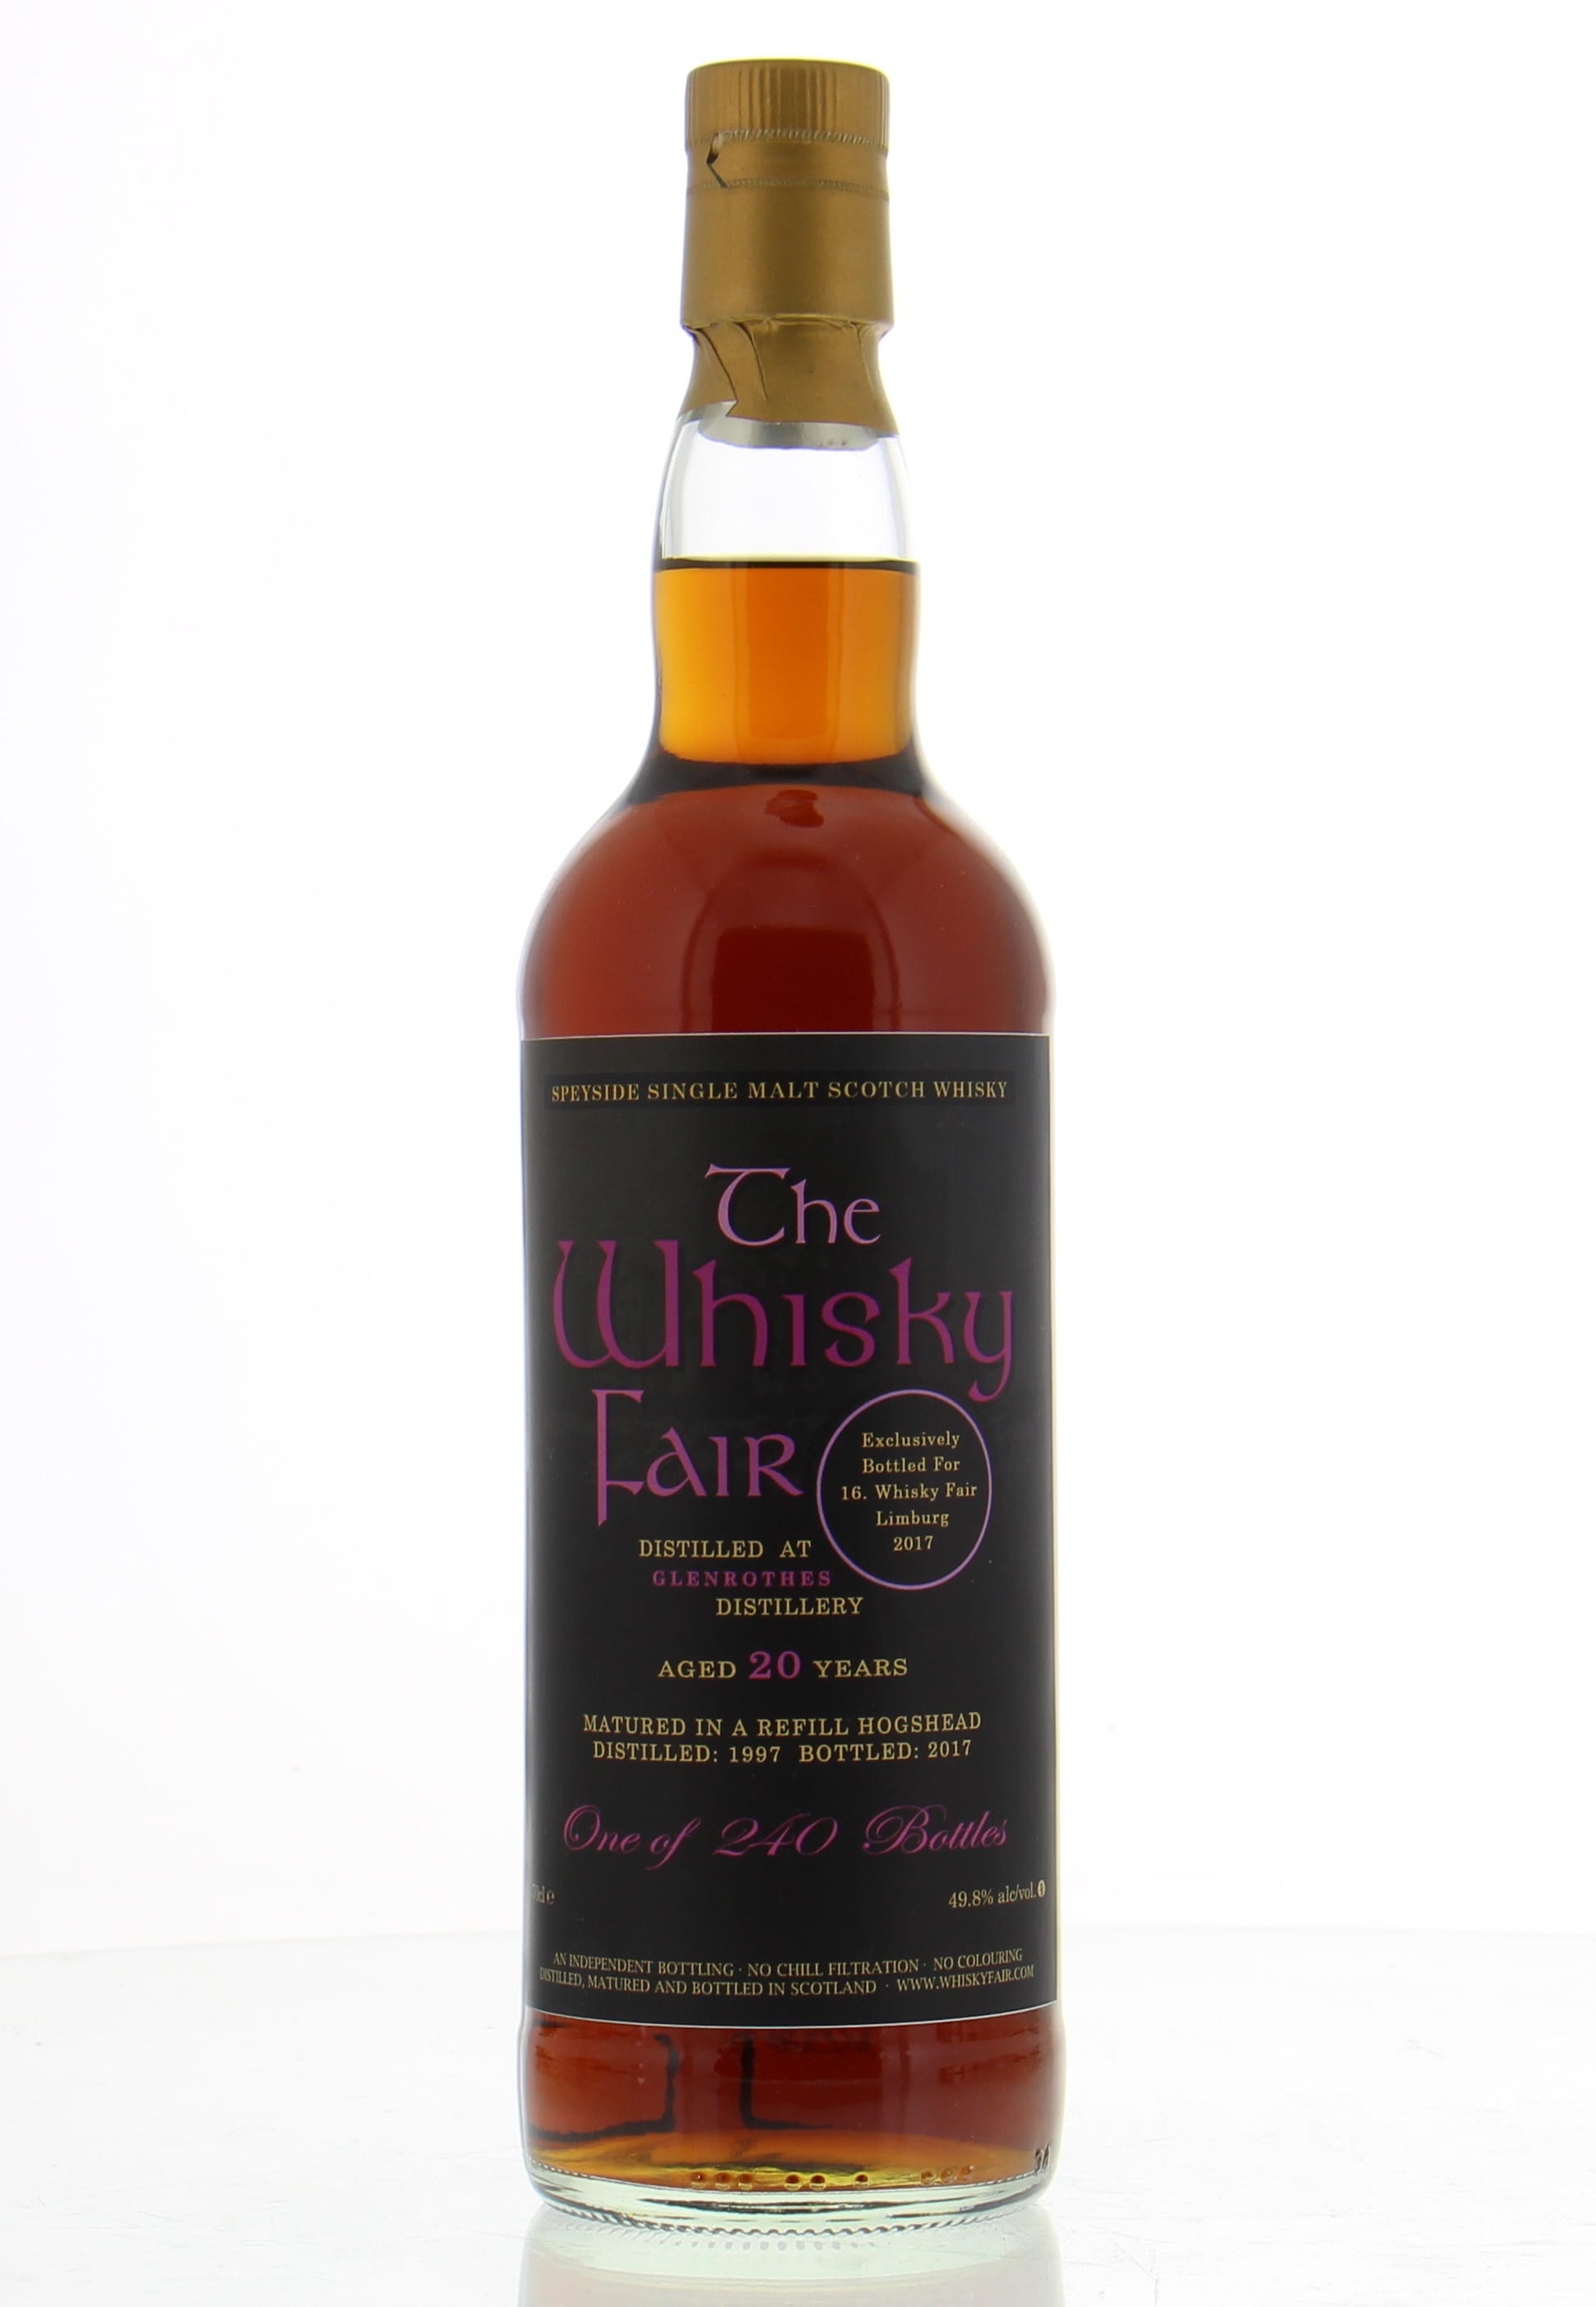 Glenrothes - 20 Years Old The Whisky Fair Limburg 49.8% 1997 Perfect